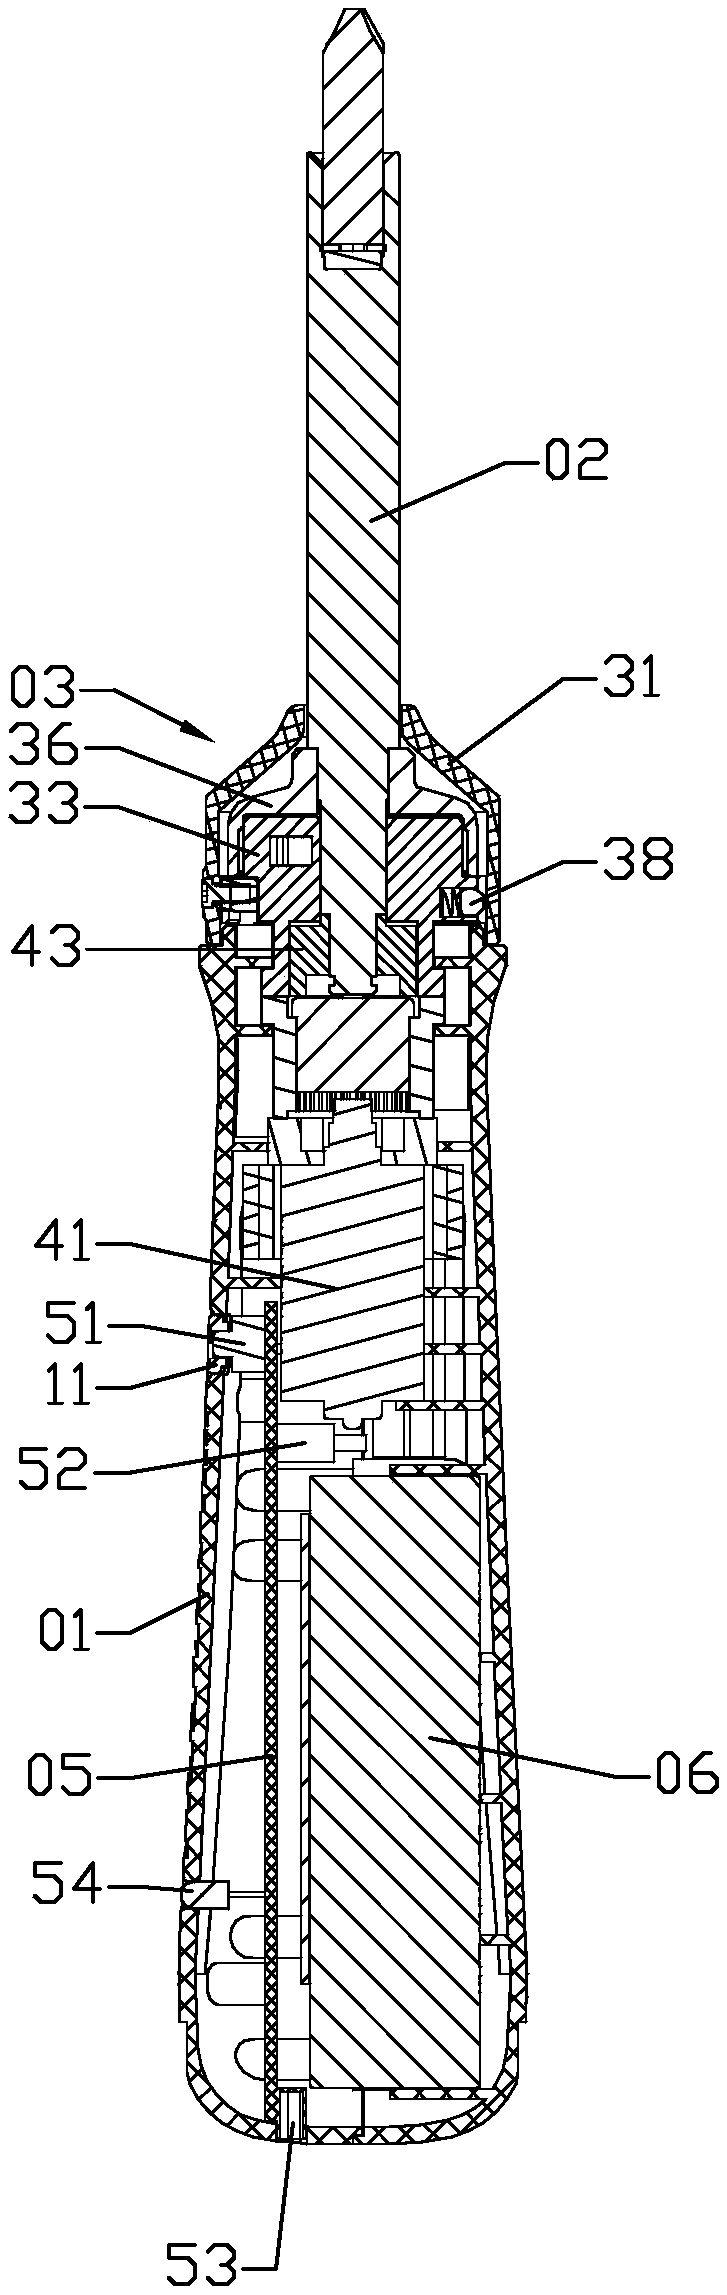 Reversible rotary jig with manual and electric operation modes